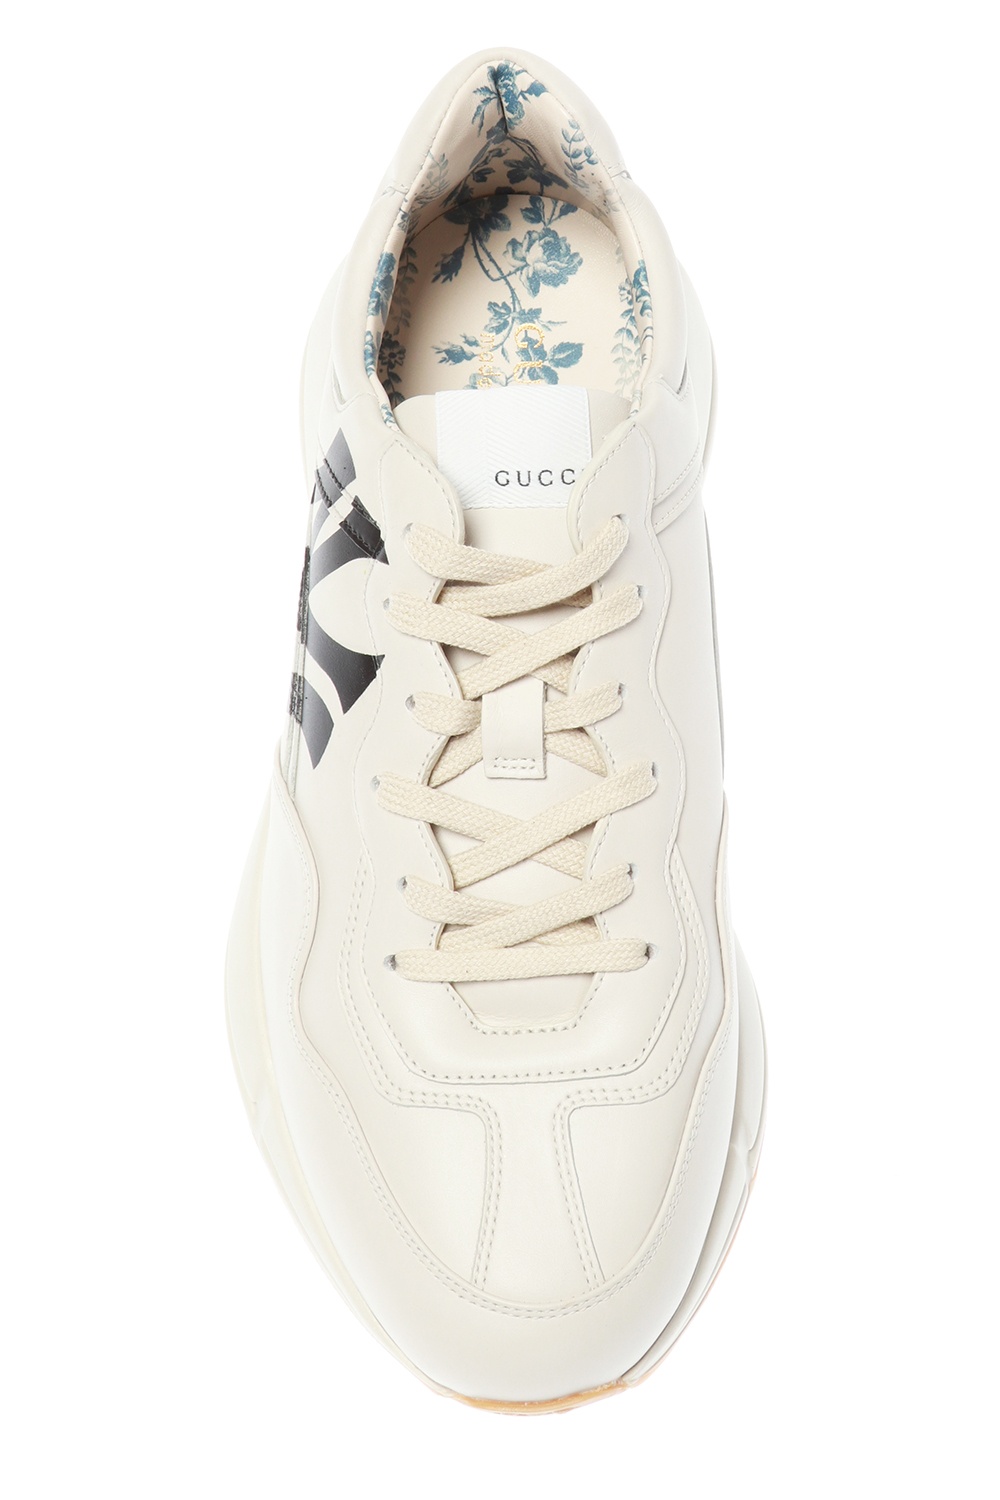 Gucci Cream Leather Rhyton NY Yankees Low Top Sneakers Size 43.5 Gucci